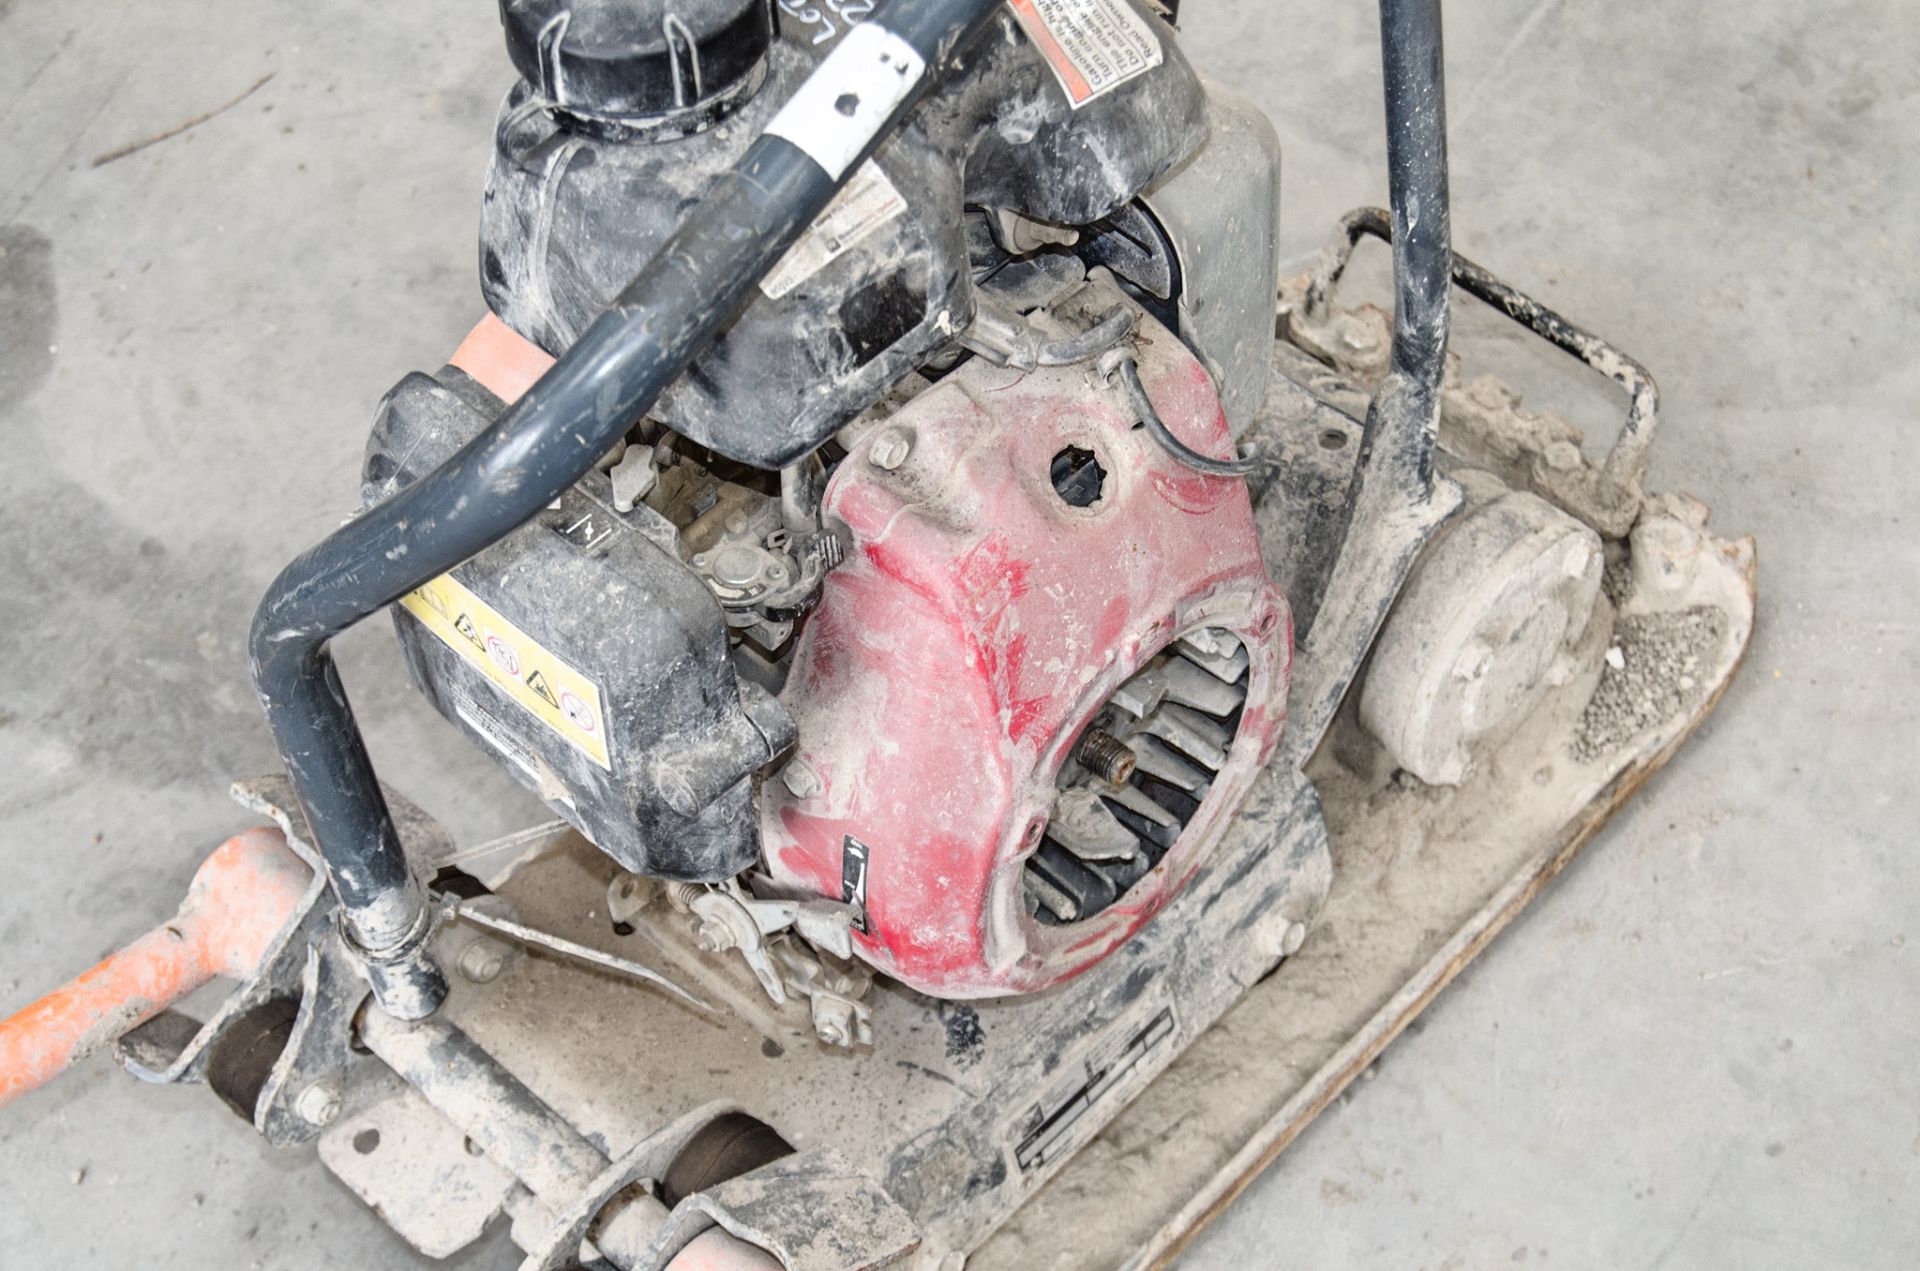 Belle LC3260 petrol driven compactor plate ** Pull cord assembly missing ** - Image 3 of 3